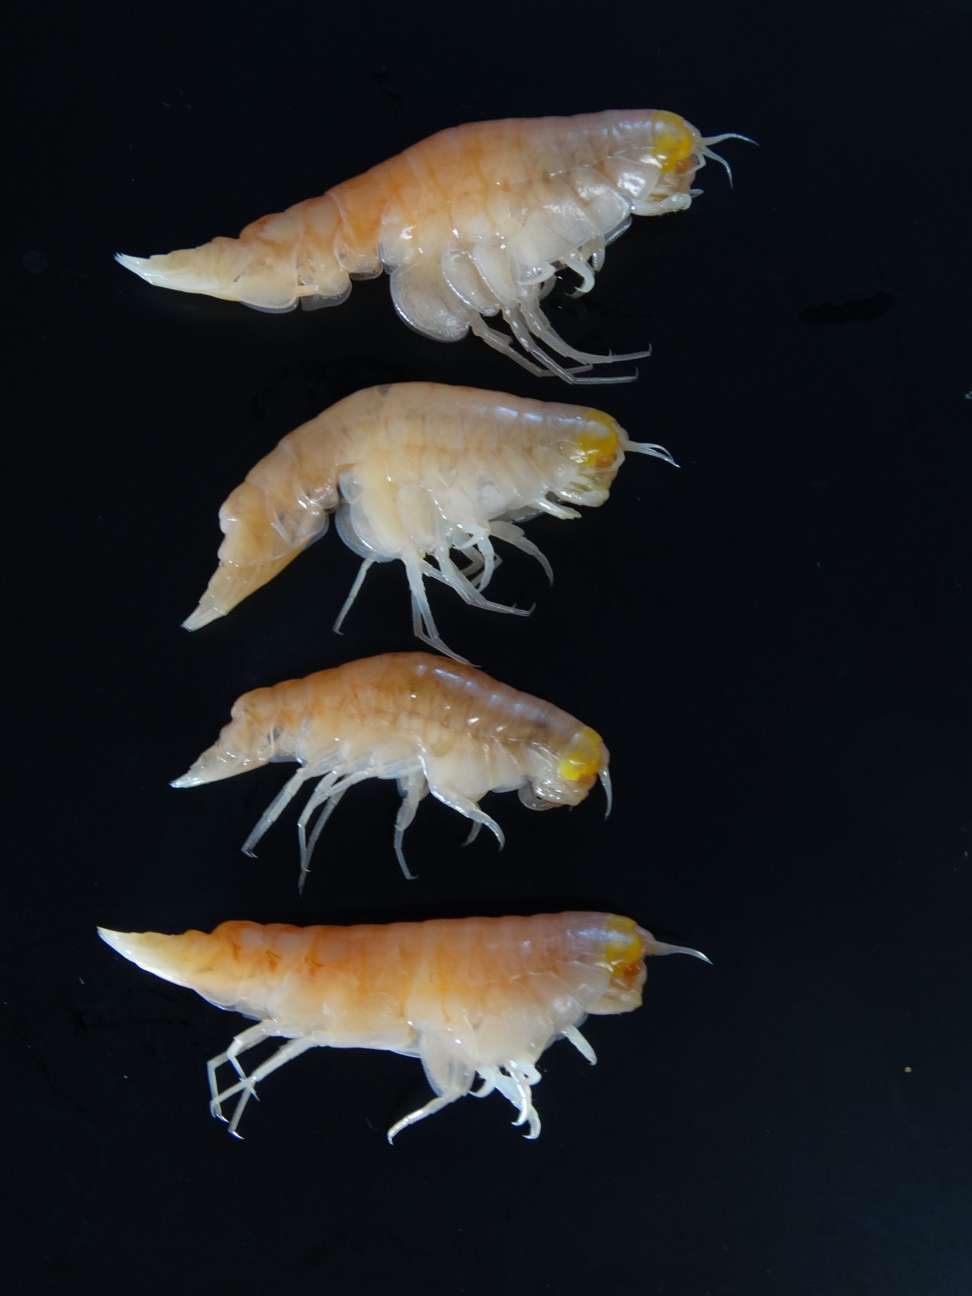 A handout photo shows ultra-deepwater amphipod Hirondellea gigas from the deepest depths of the Mariana Trench in the Northwest Pacific Ocean. Banned chemicals are tainting the tiny crustaceans, researchers have found. Photo: AFP